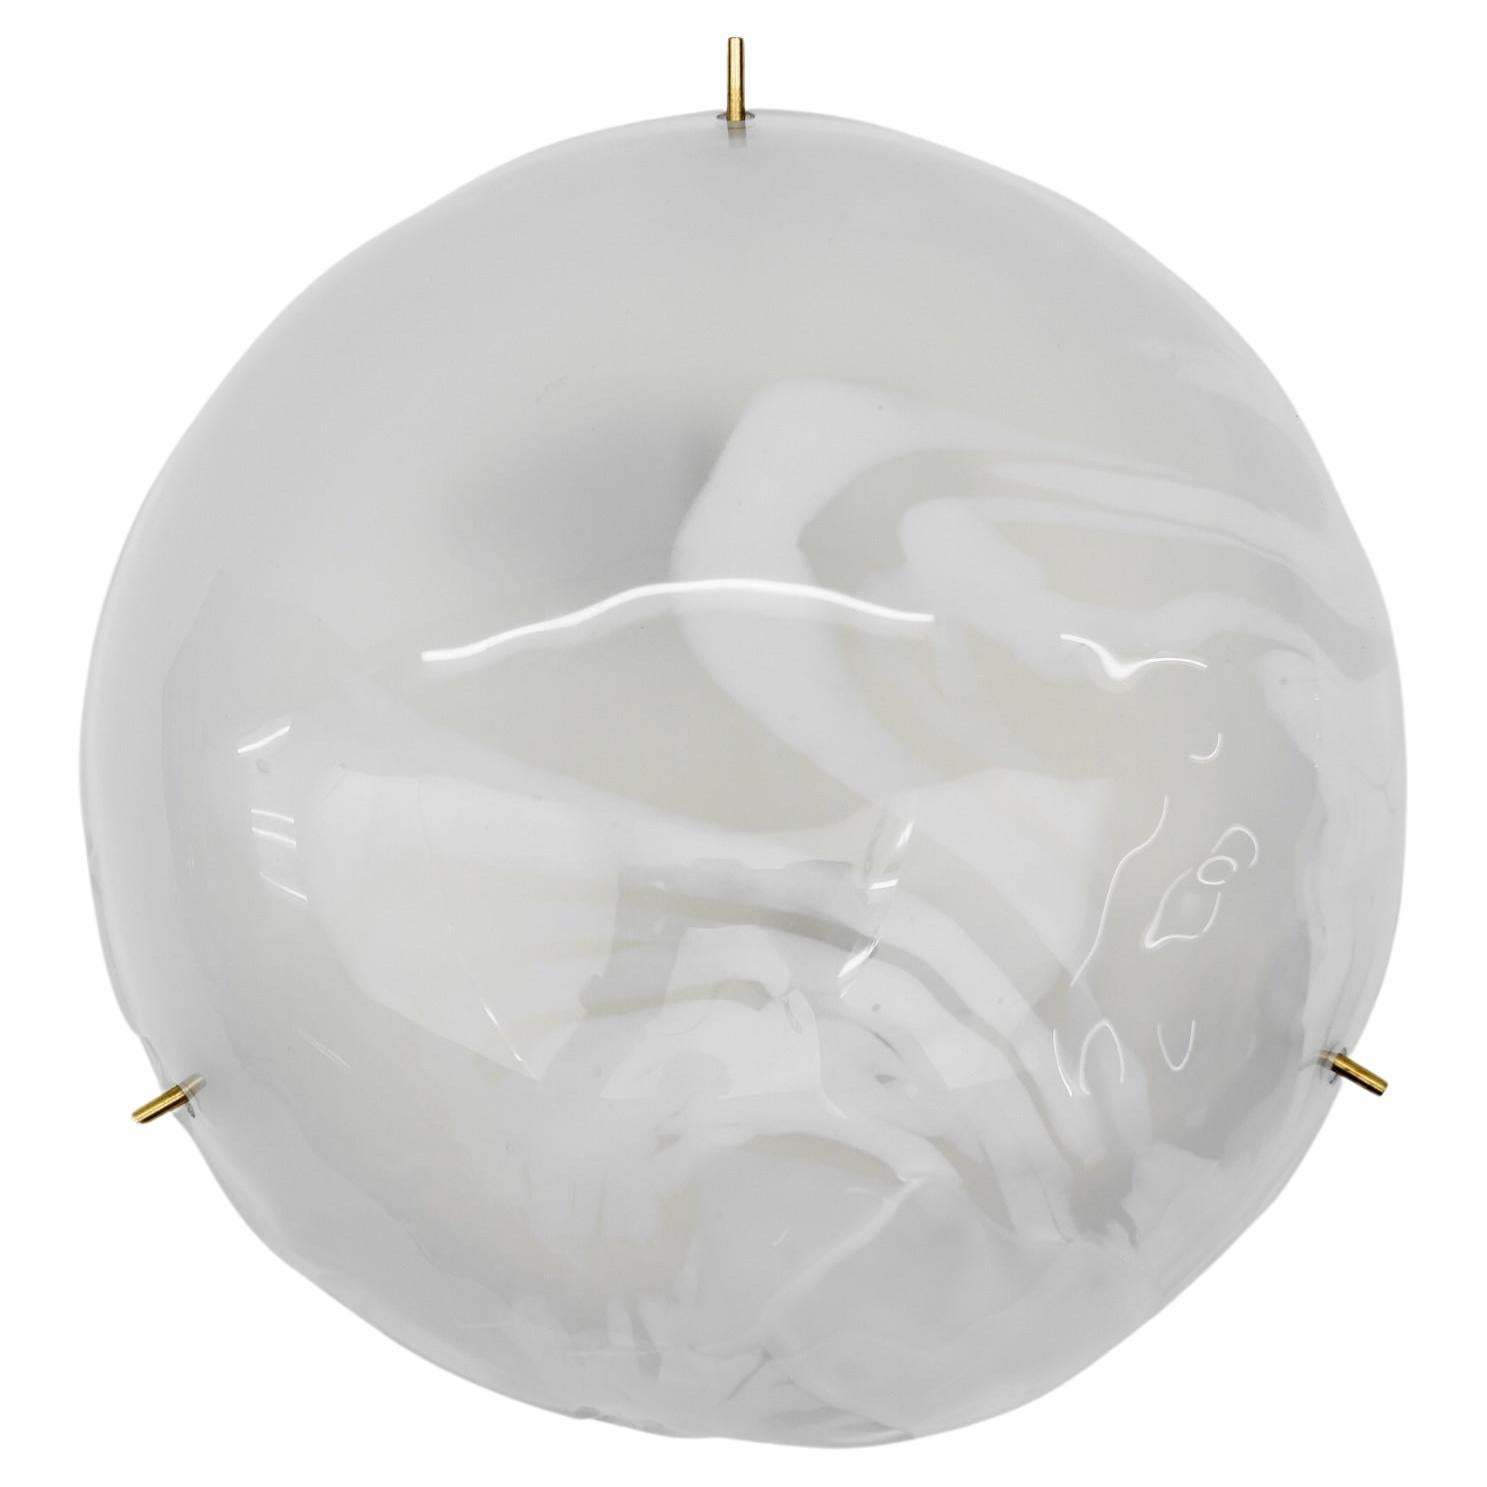 White and Gold Murano Glass Flush Mount Light by Hillebrand, Germany 1960s For Sale